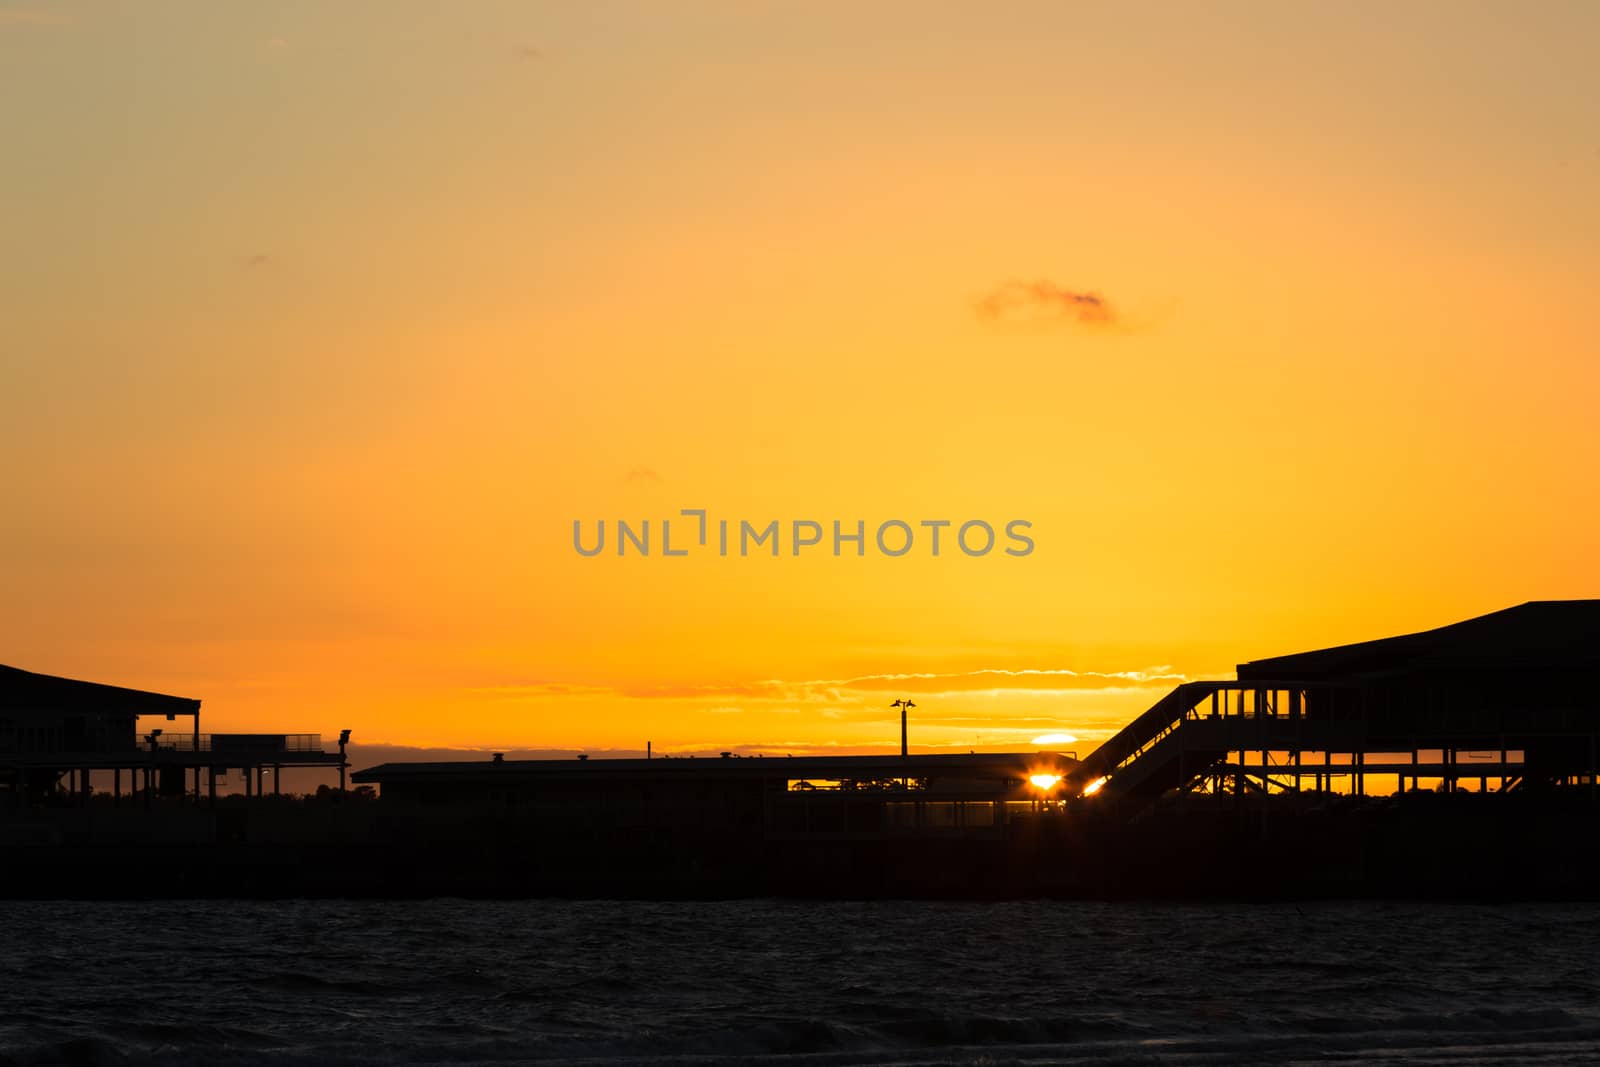 Silhouette of Station Pier in Melbourne with the sunsetting in the background.